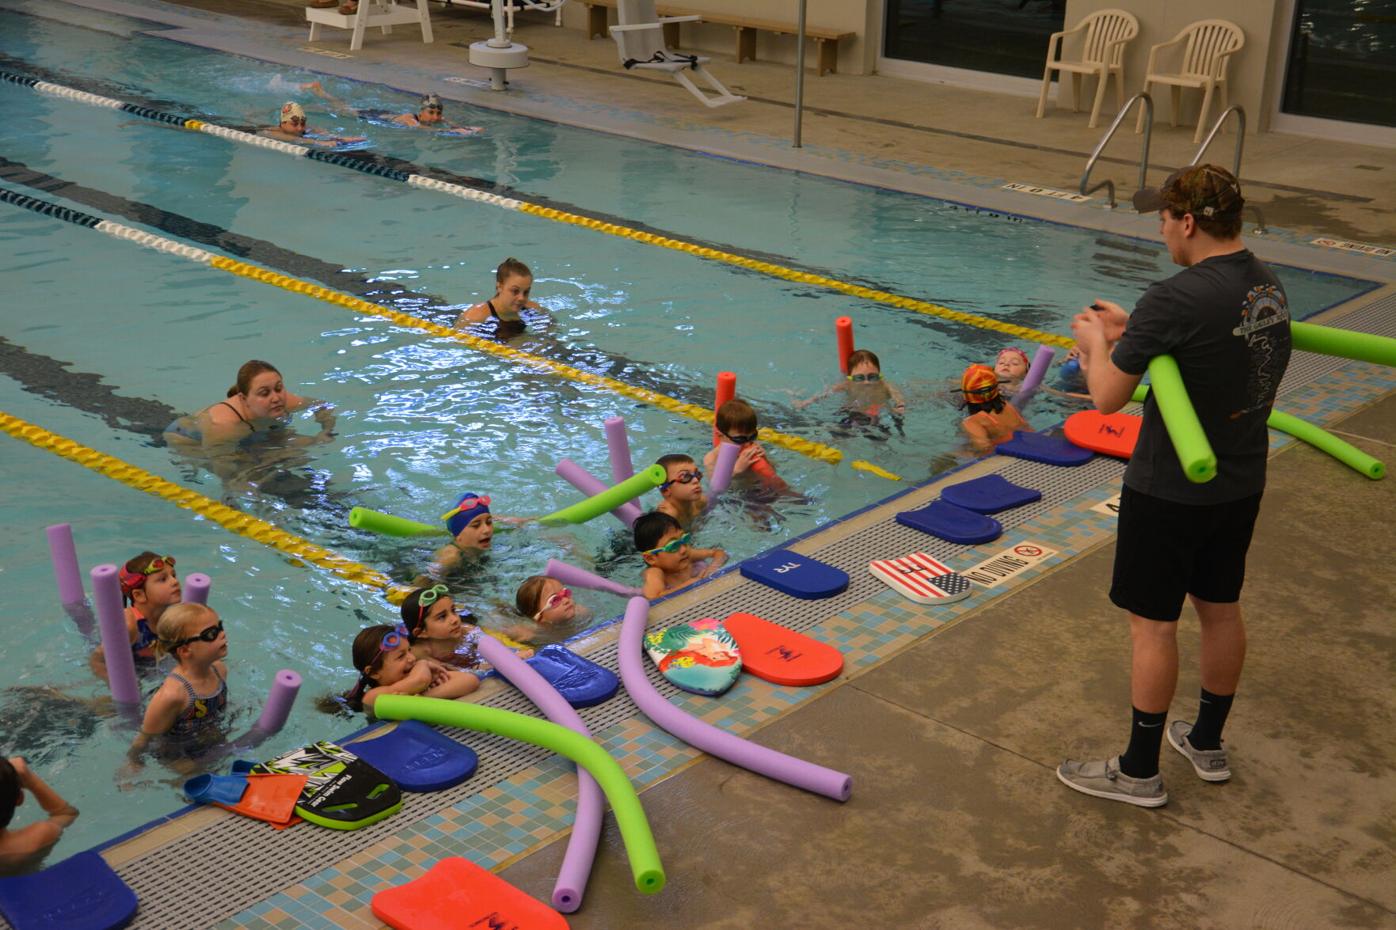 Training young swimmers